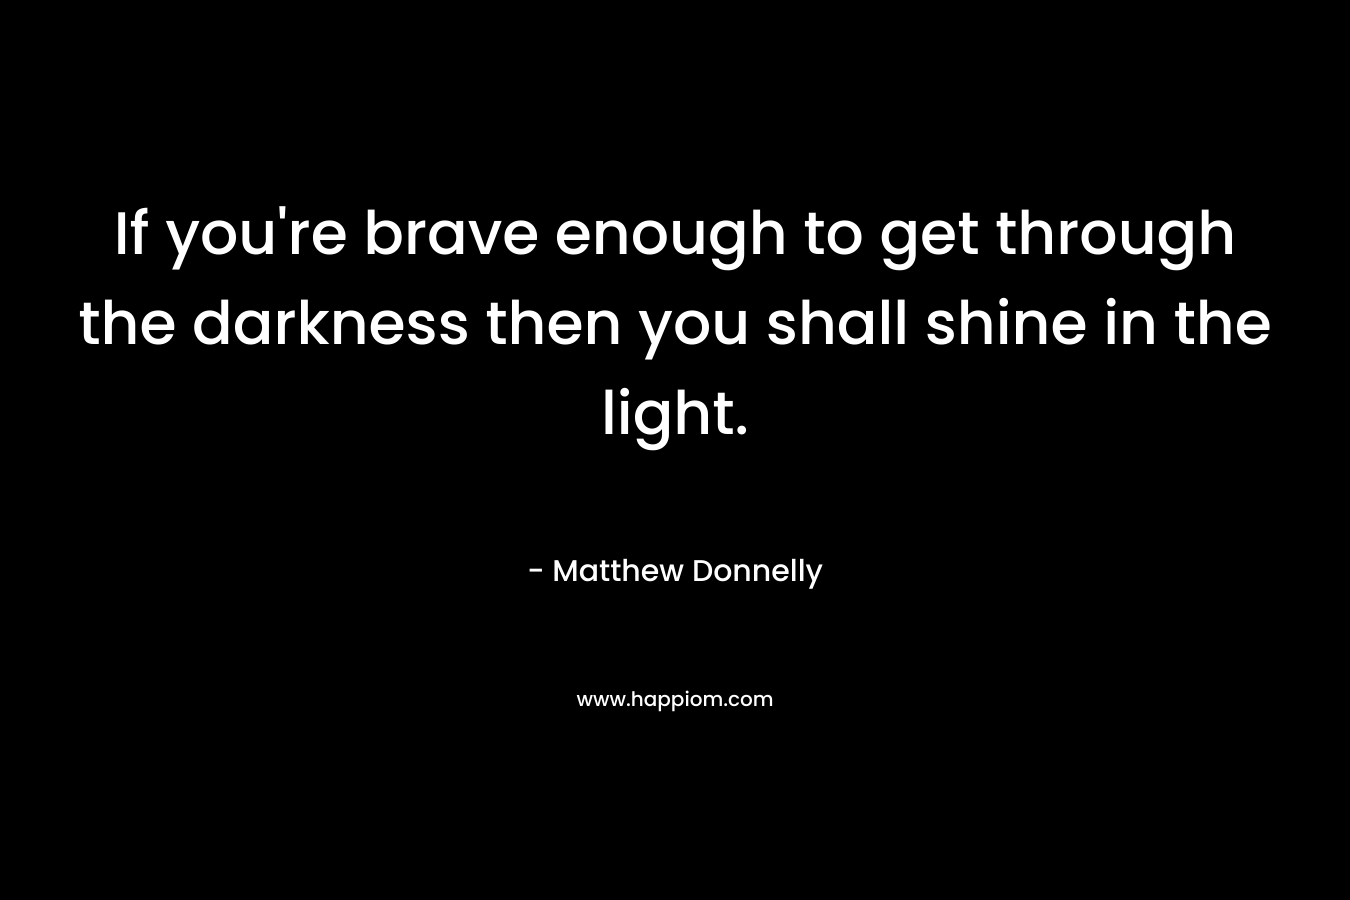 If you're brave enough to get through the darkness then you shall shine in the light.